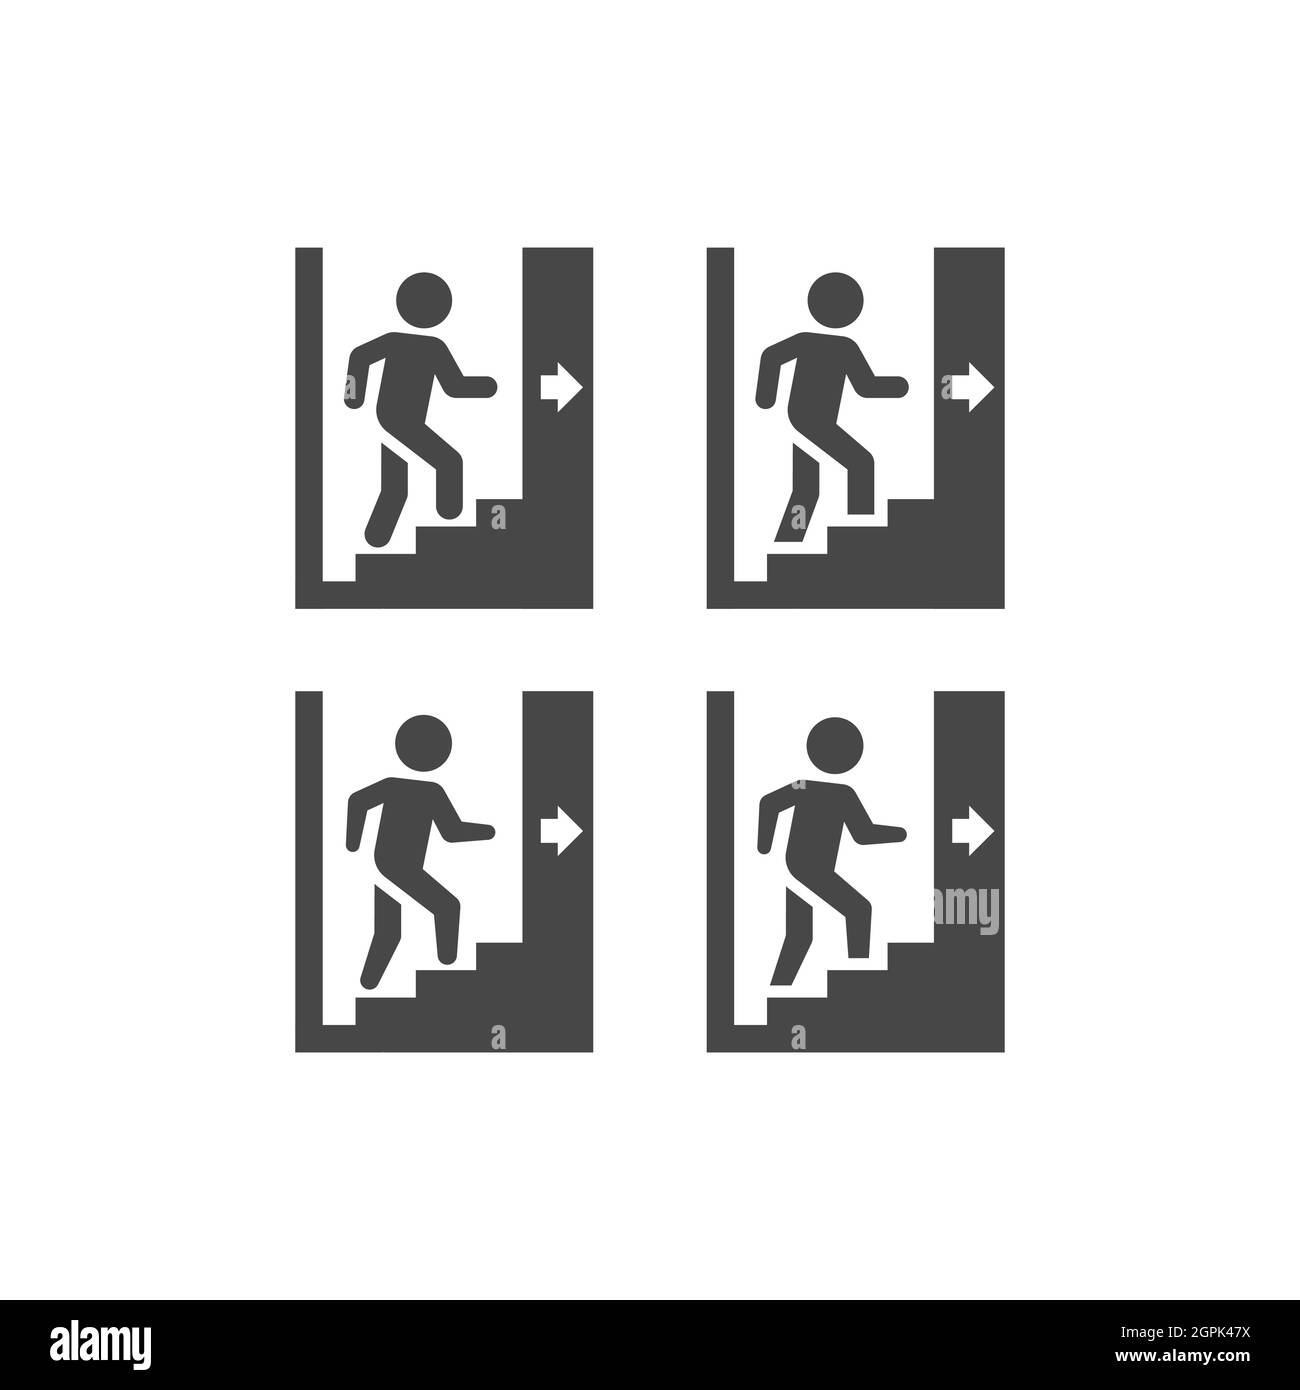 Man going up stairs black vector icon Stock Vector